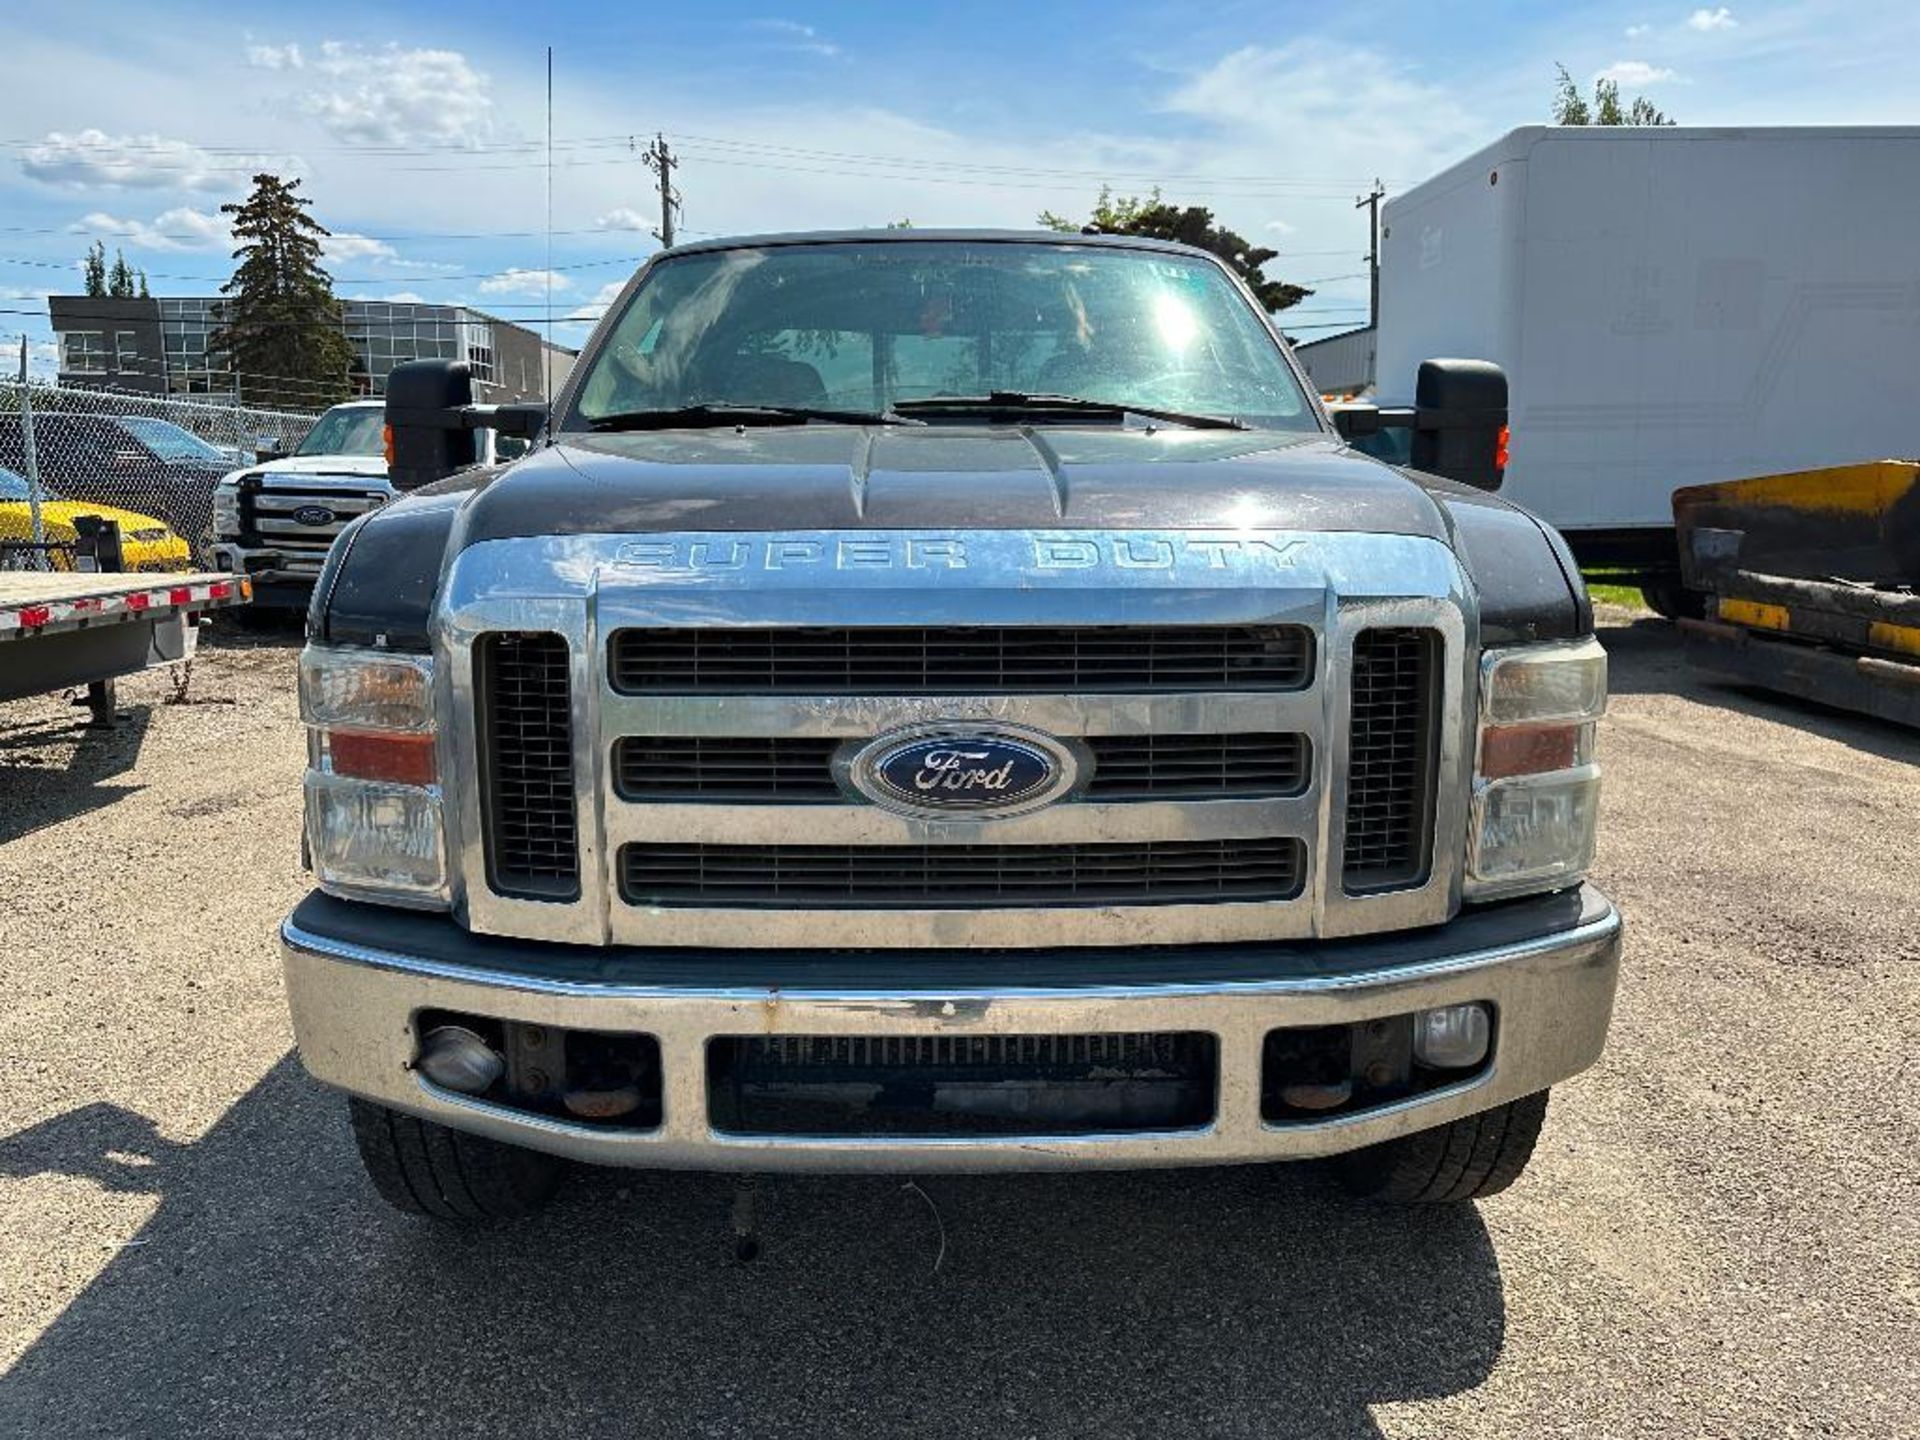 2008 Ford F-350 Lariat, Ext. Cab, Diesel, 337,108 kms, VIN: 1FTWX31R18EA14248 - Image 6 of 13